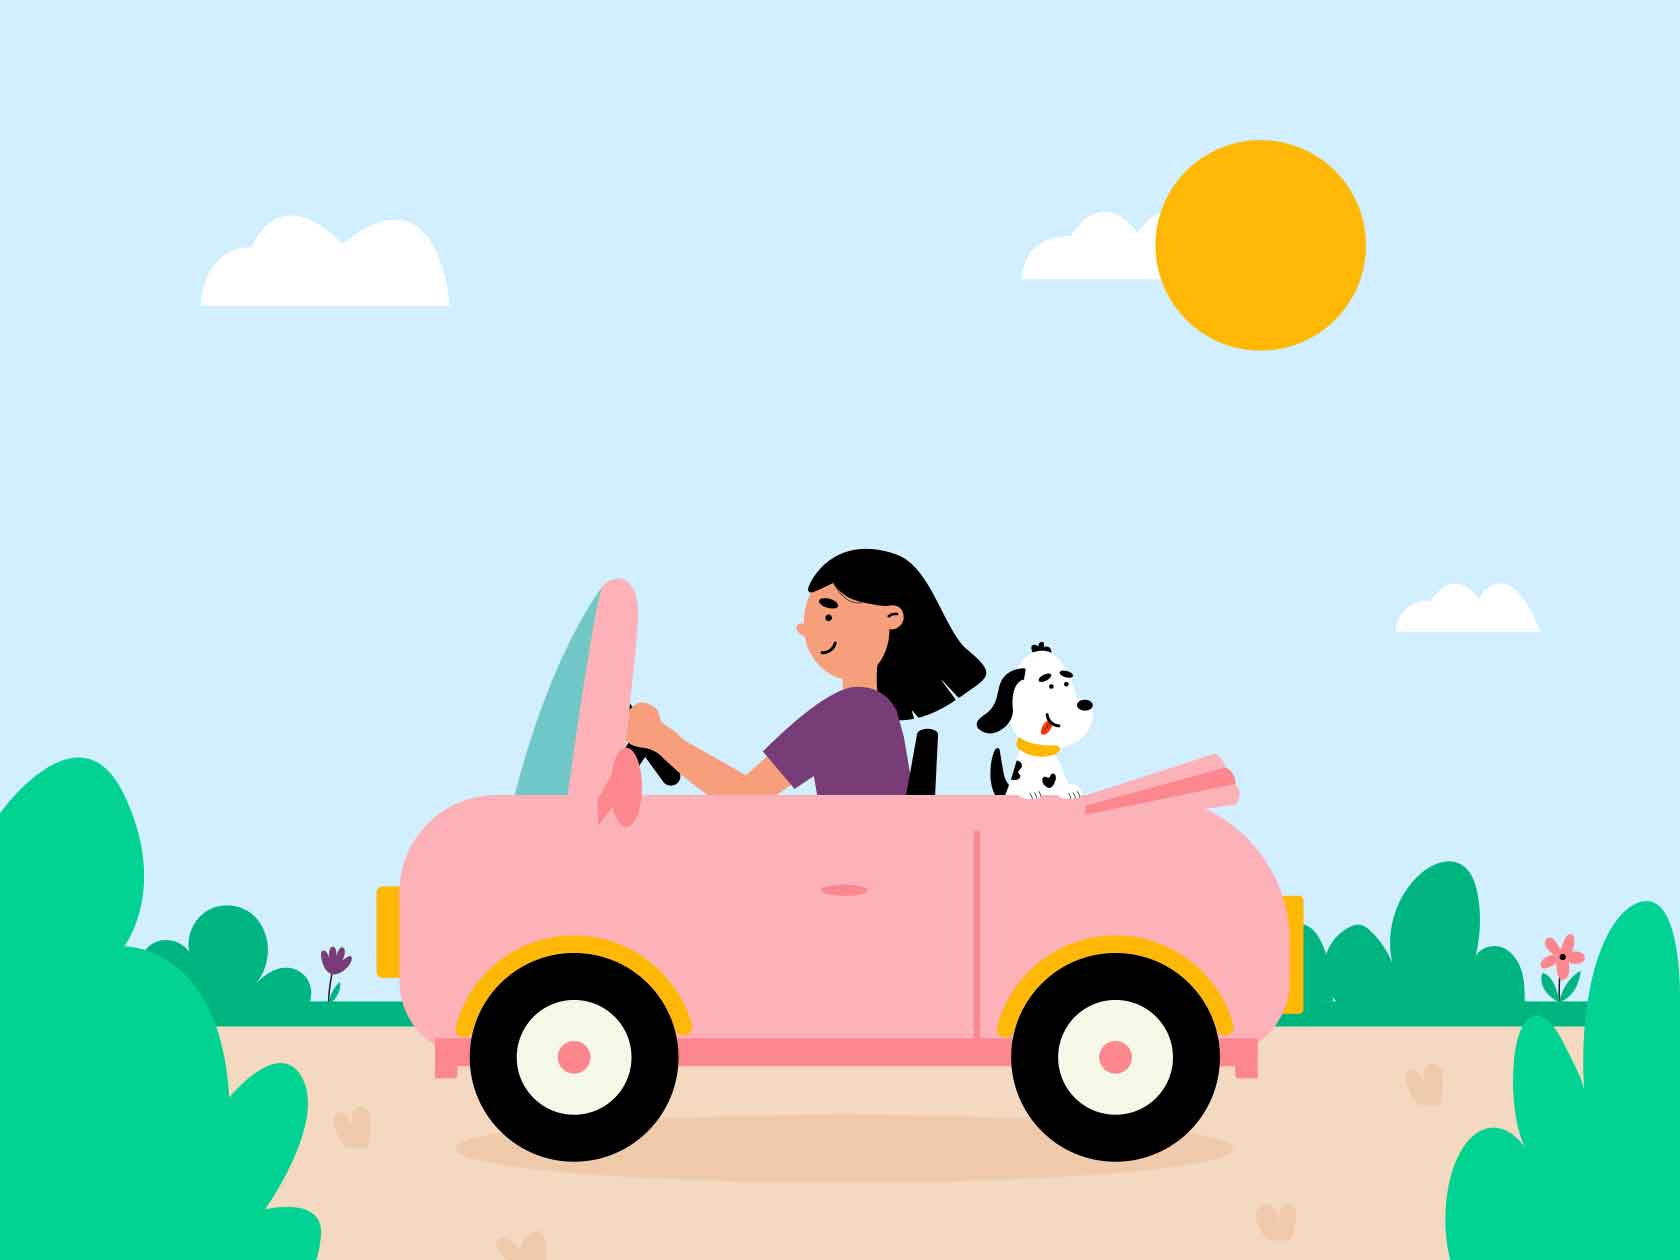 Road trip with dog illustration